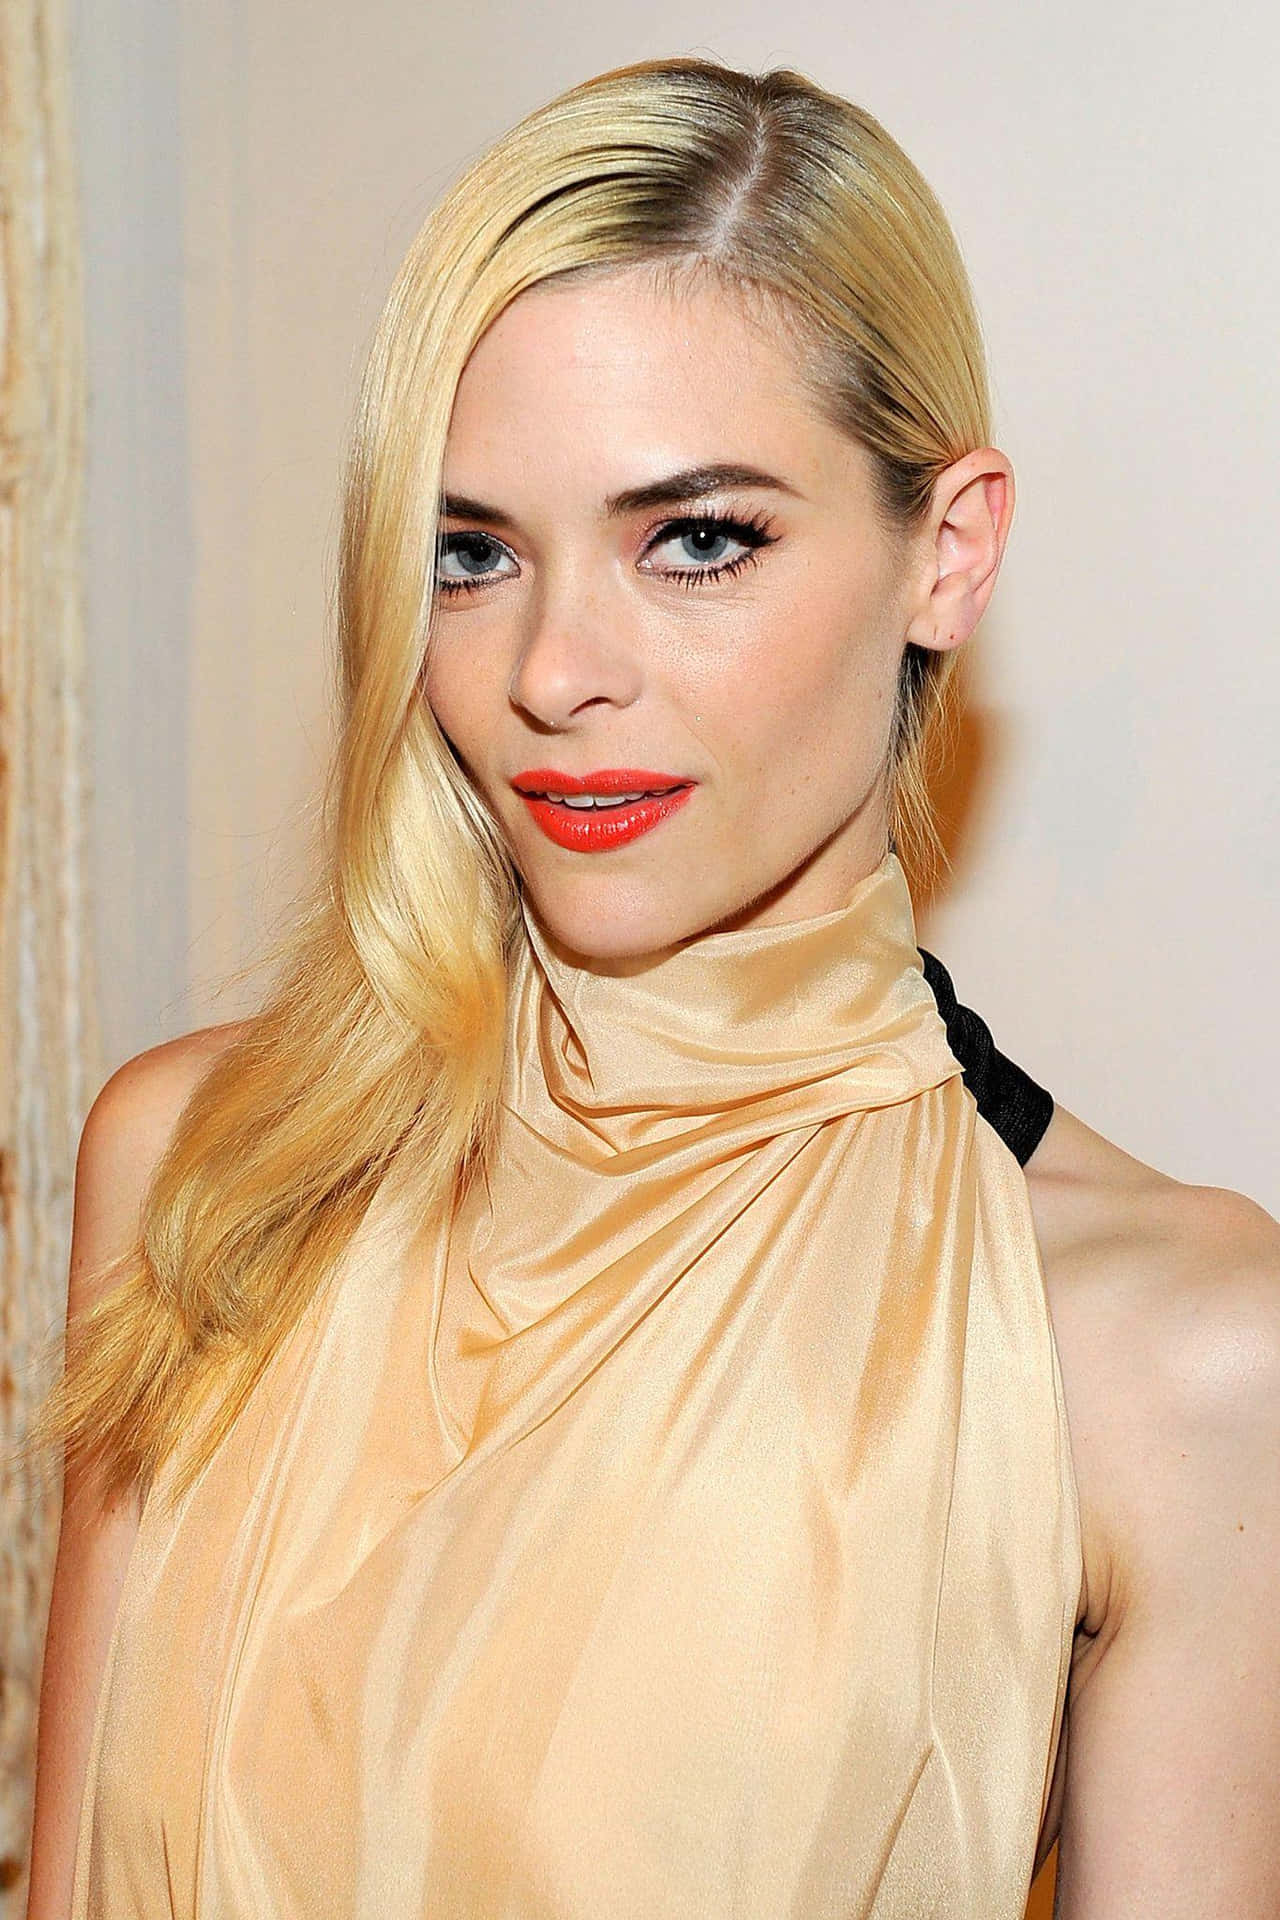 Jaime King striking a pose in a stylish outfit Wallpaper